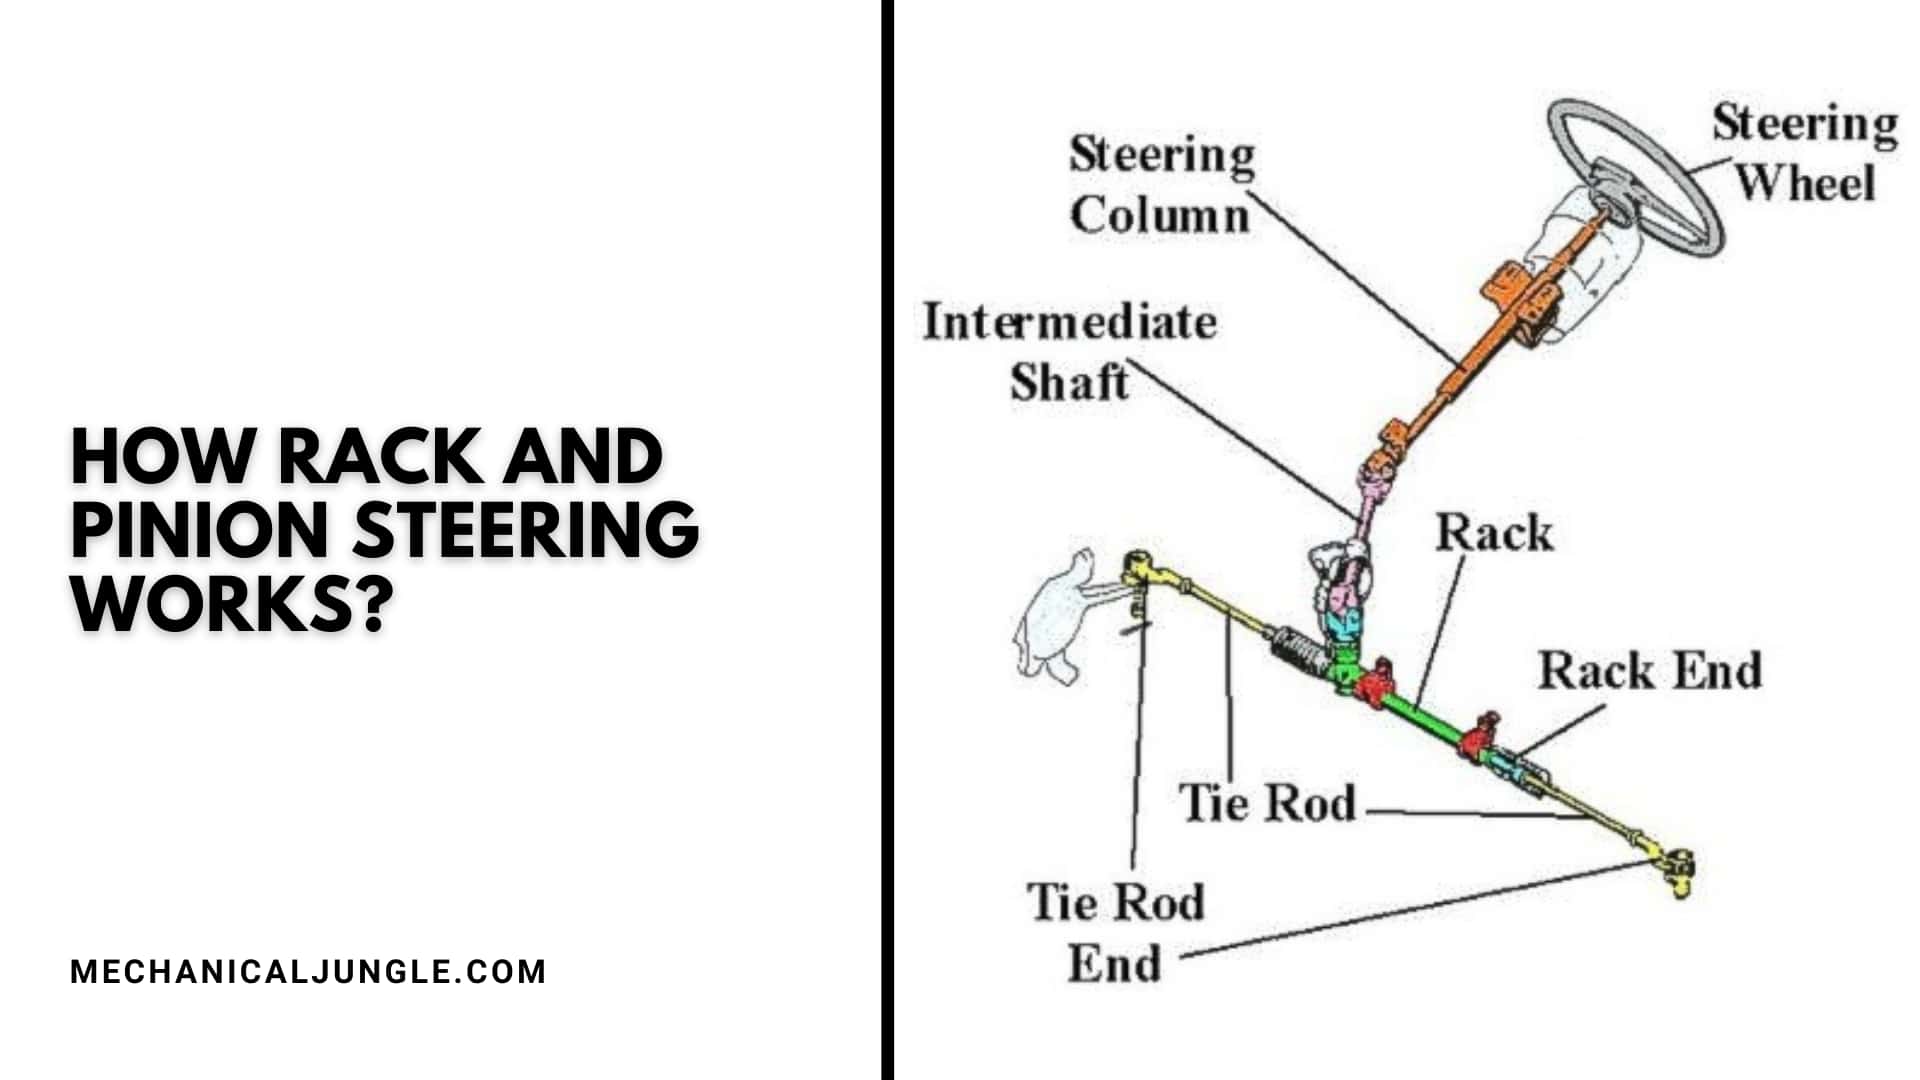 How Rack and Pinion Steering Works?